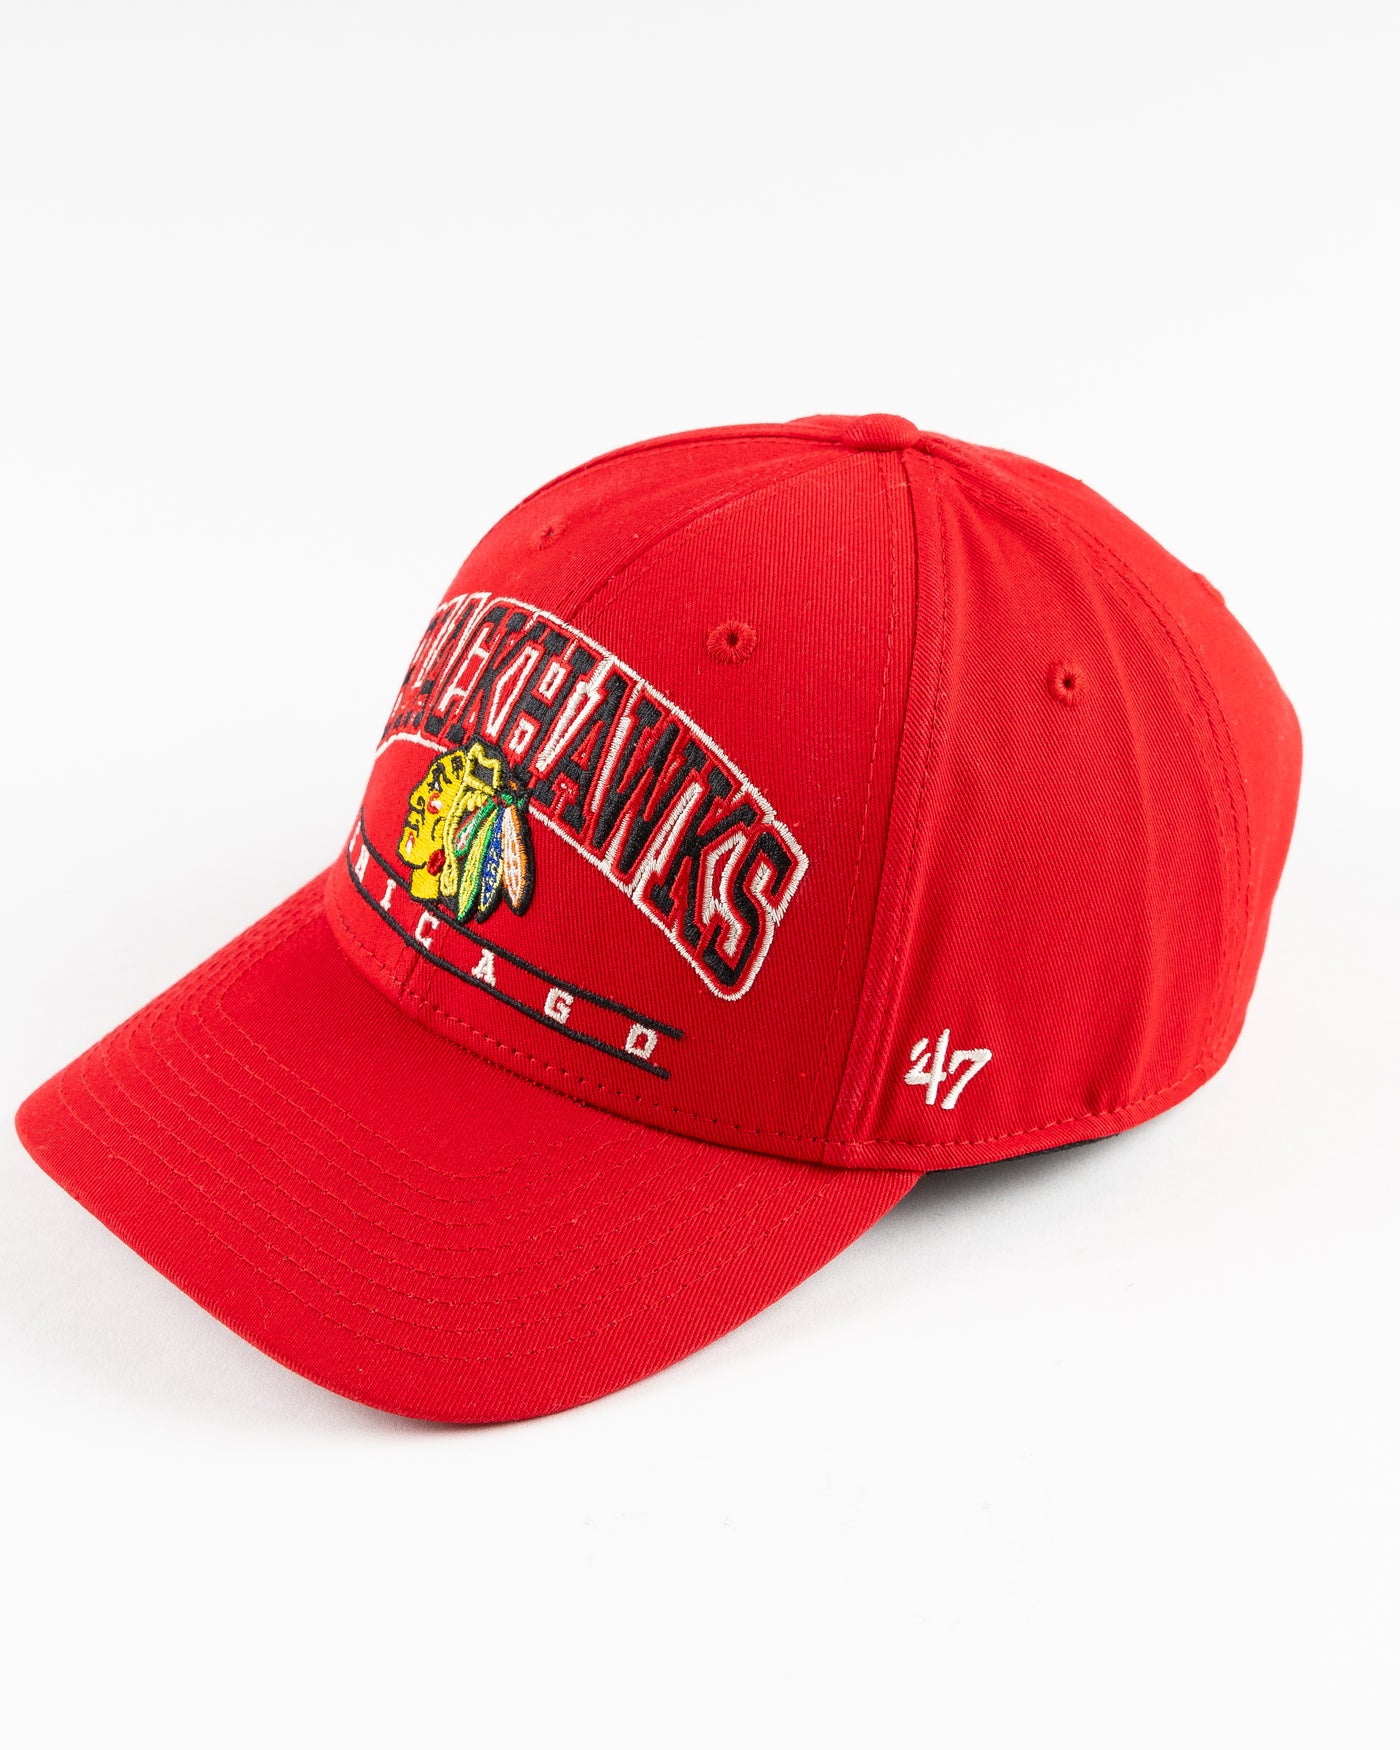 red '47 brand baseball cap with Chicago Blackhawks graphic embroidered on front - left angle lay flat